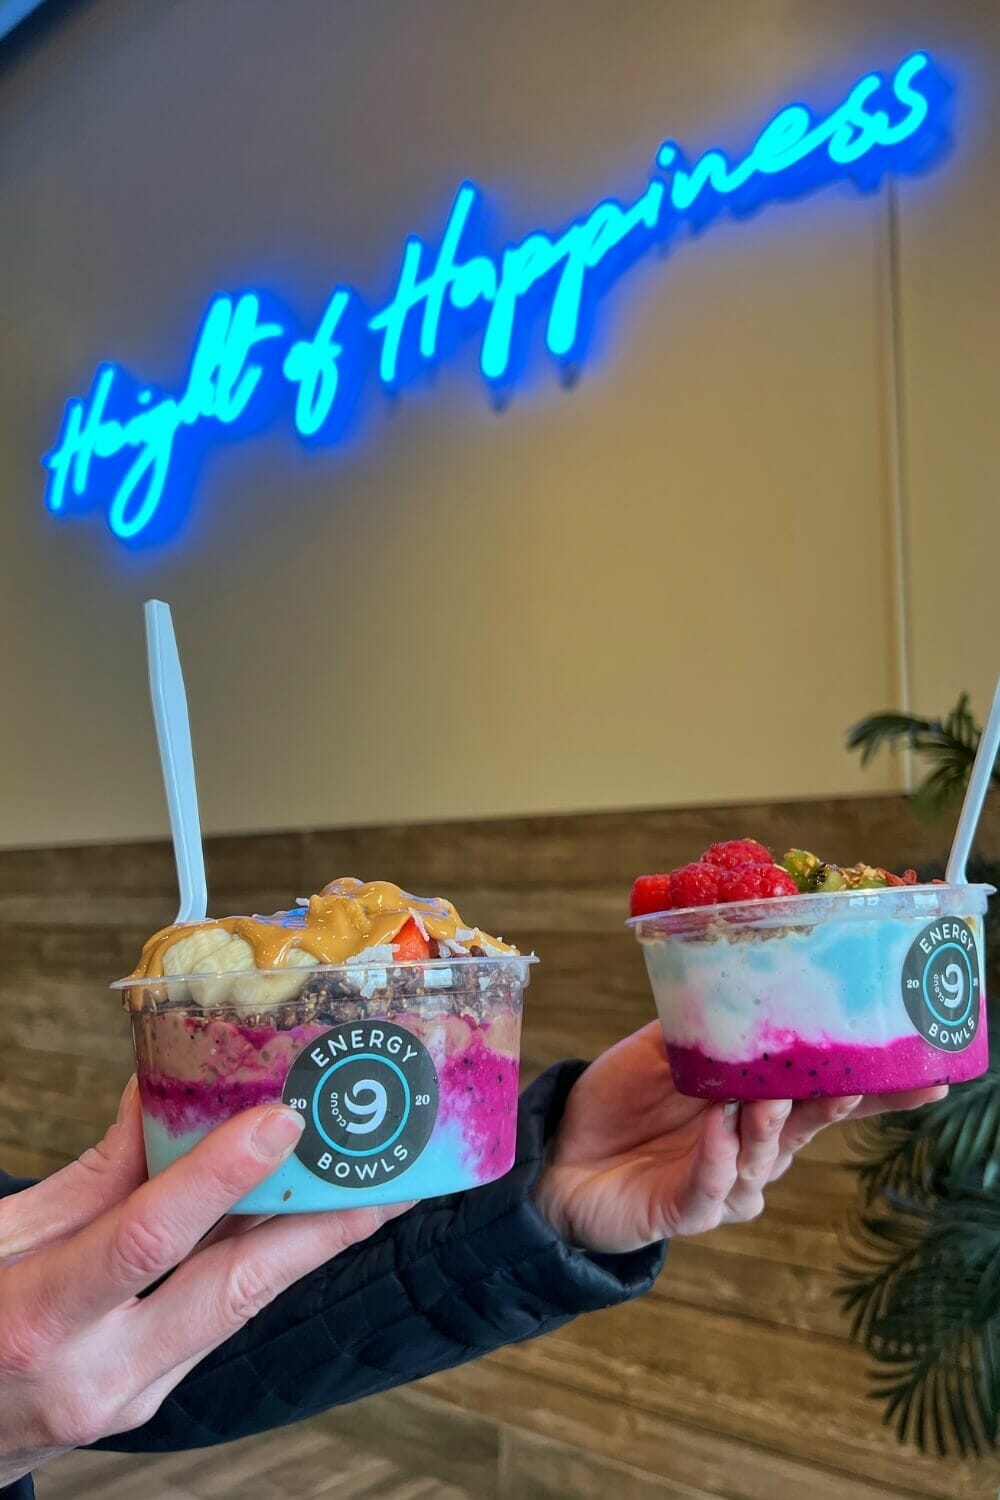 Two energy bowls held up in front of a sign that says "height of happiness"